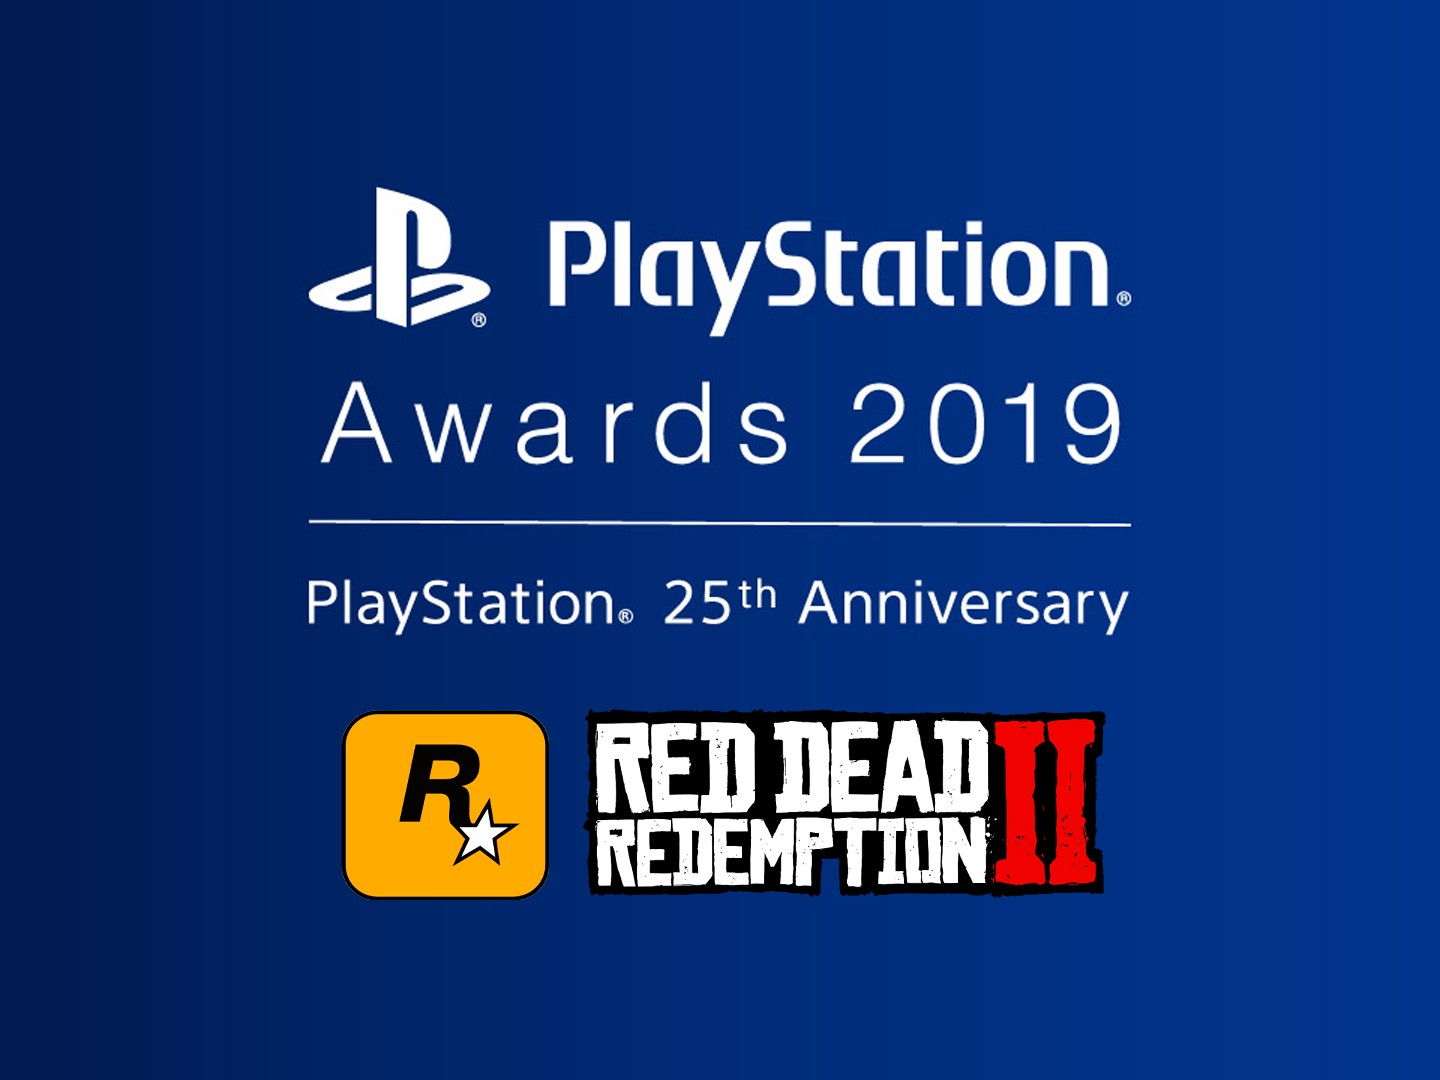 PlayStation Awards Red Dead Redemption II